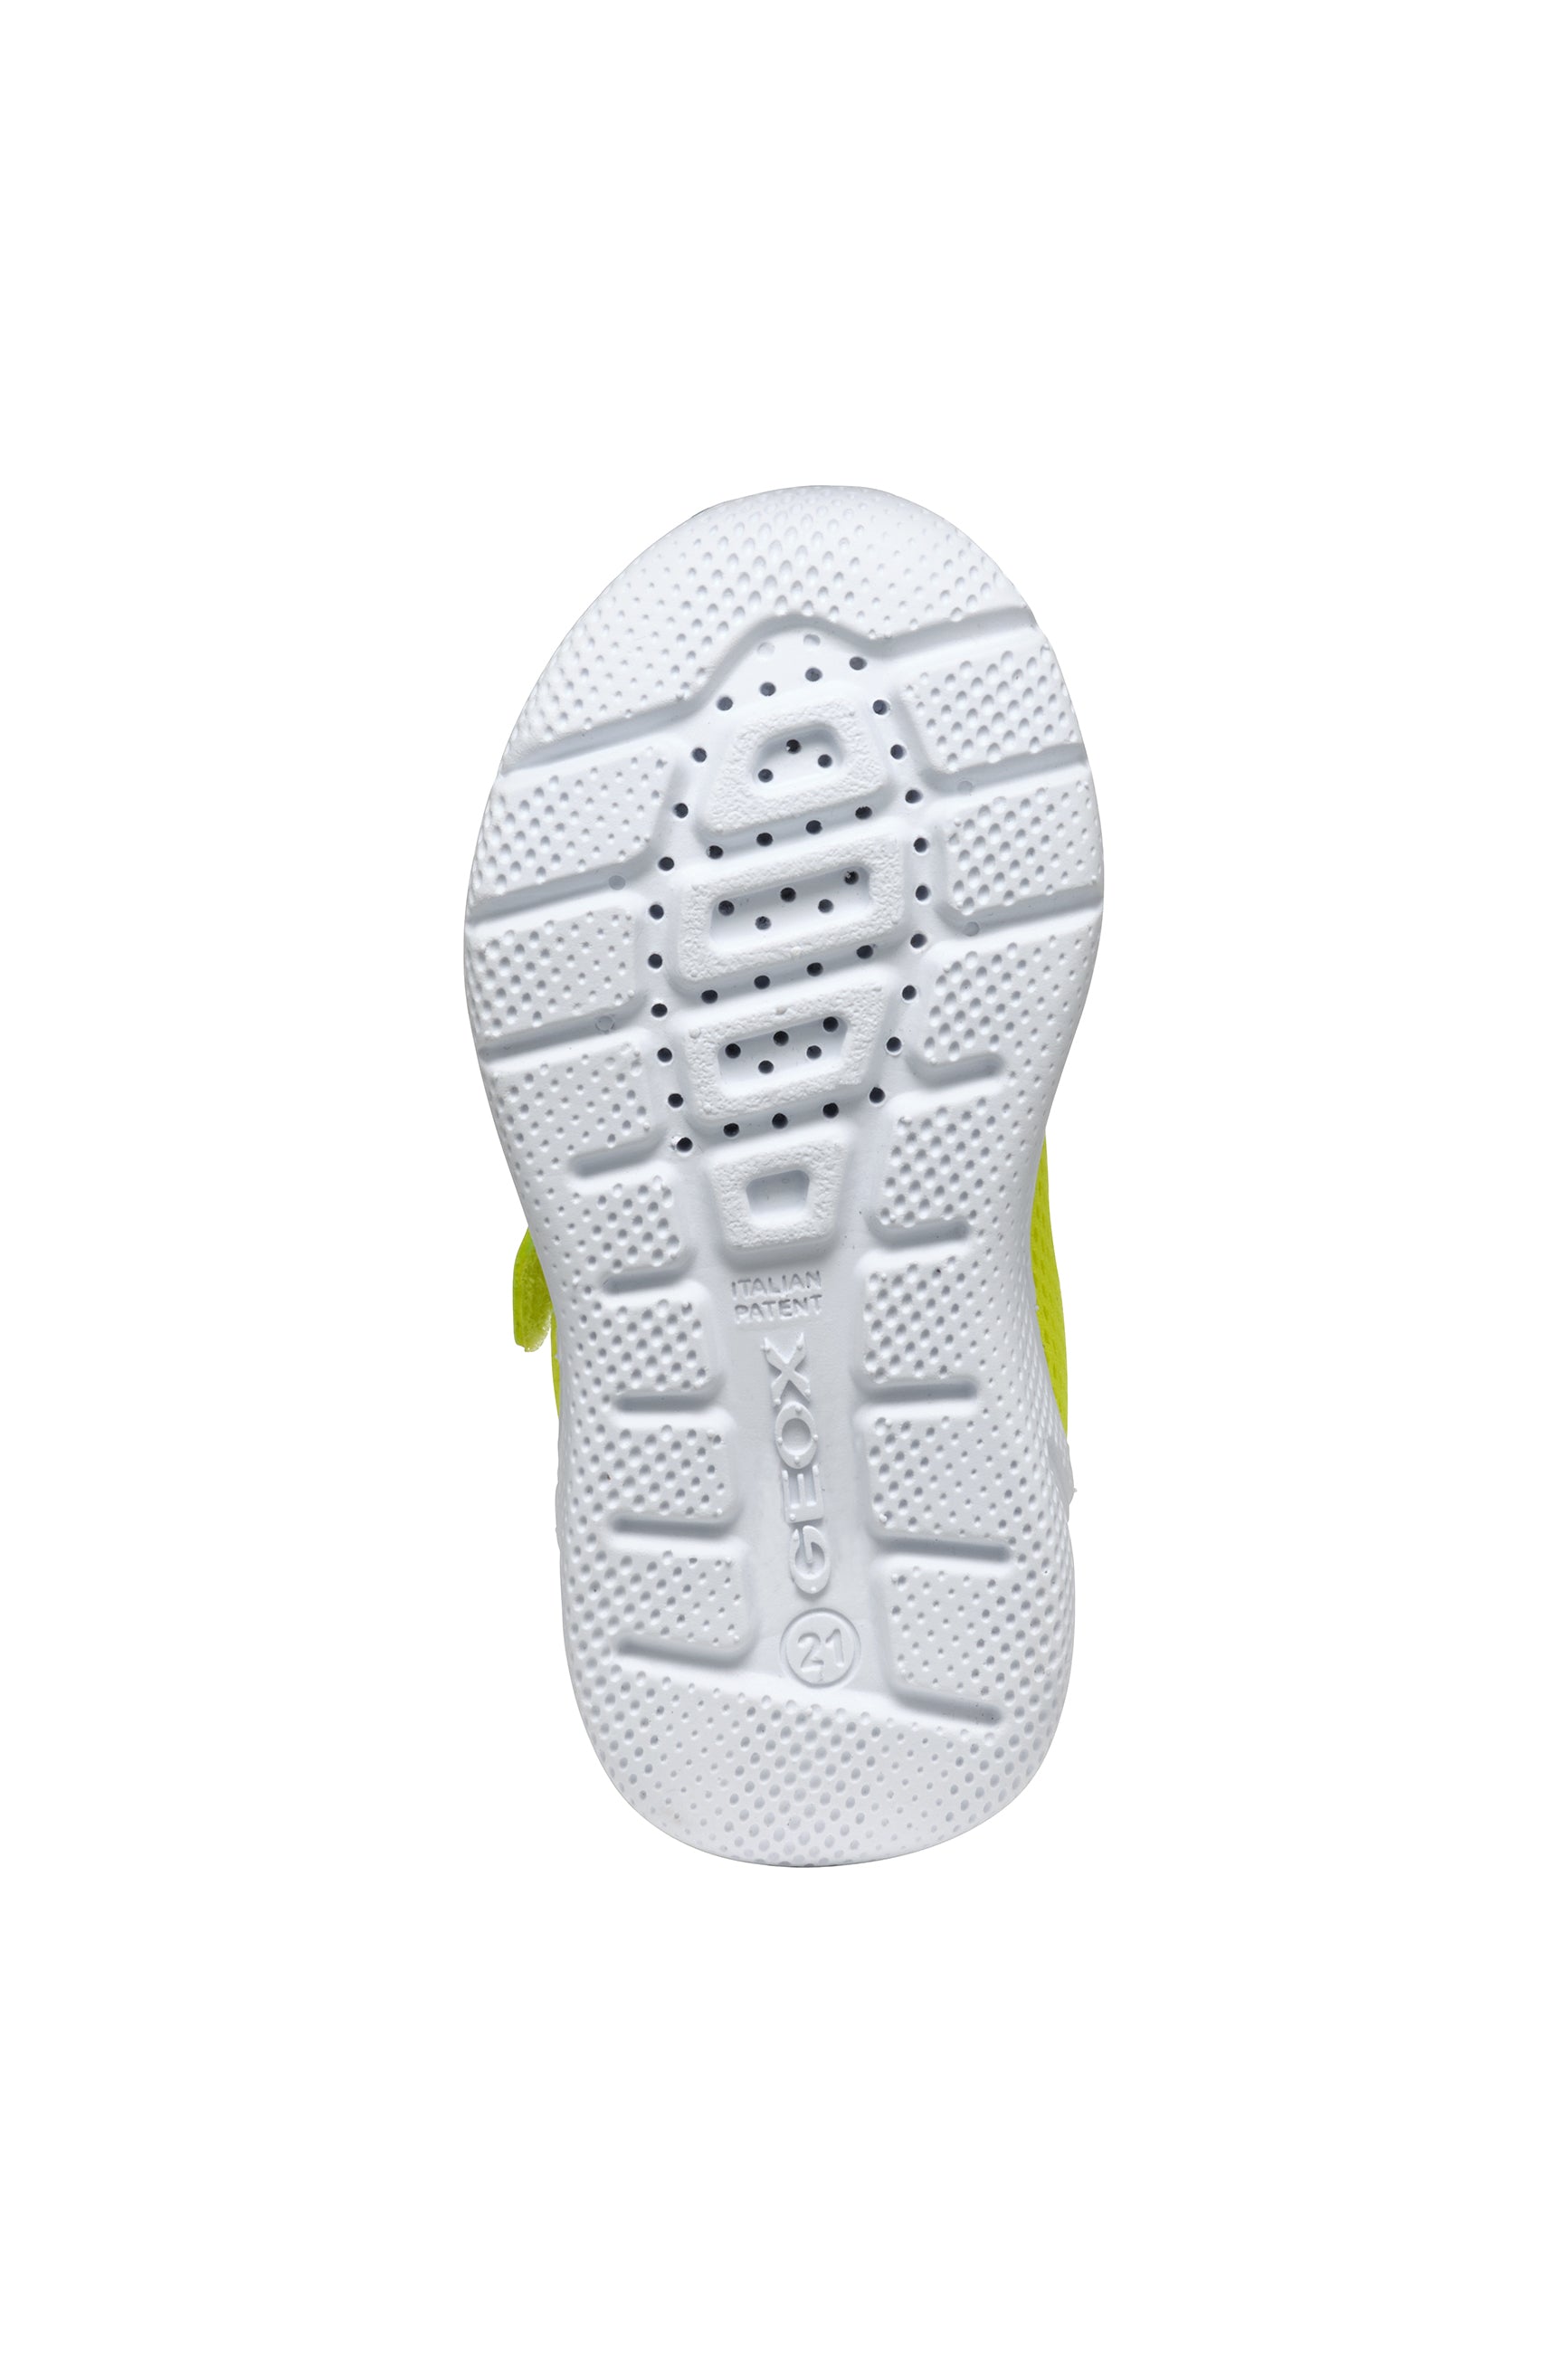 A unisex trainer by Geox, style B Sprintye, in fluorescent green with bungee lace and velcro fastening. View of white sole.